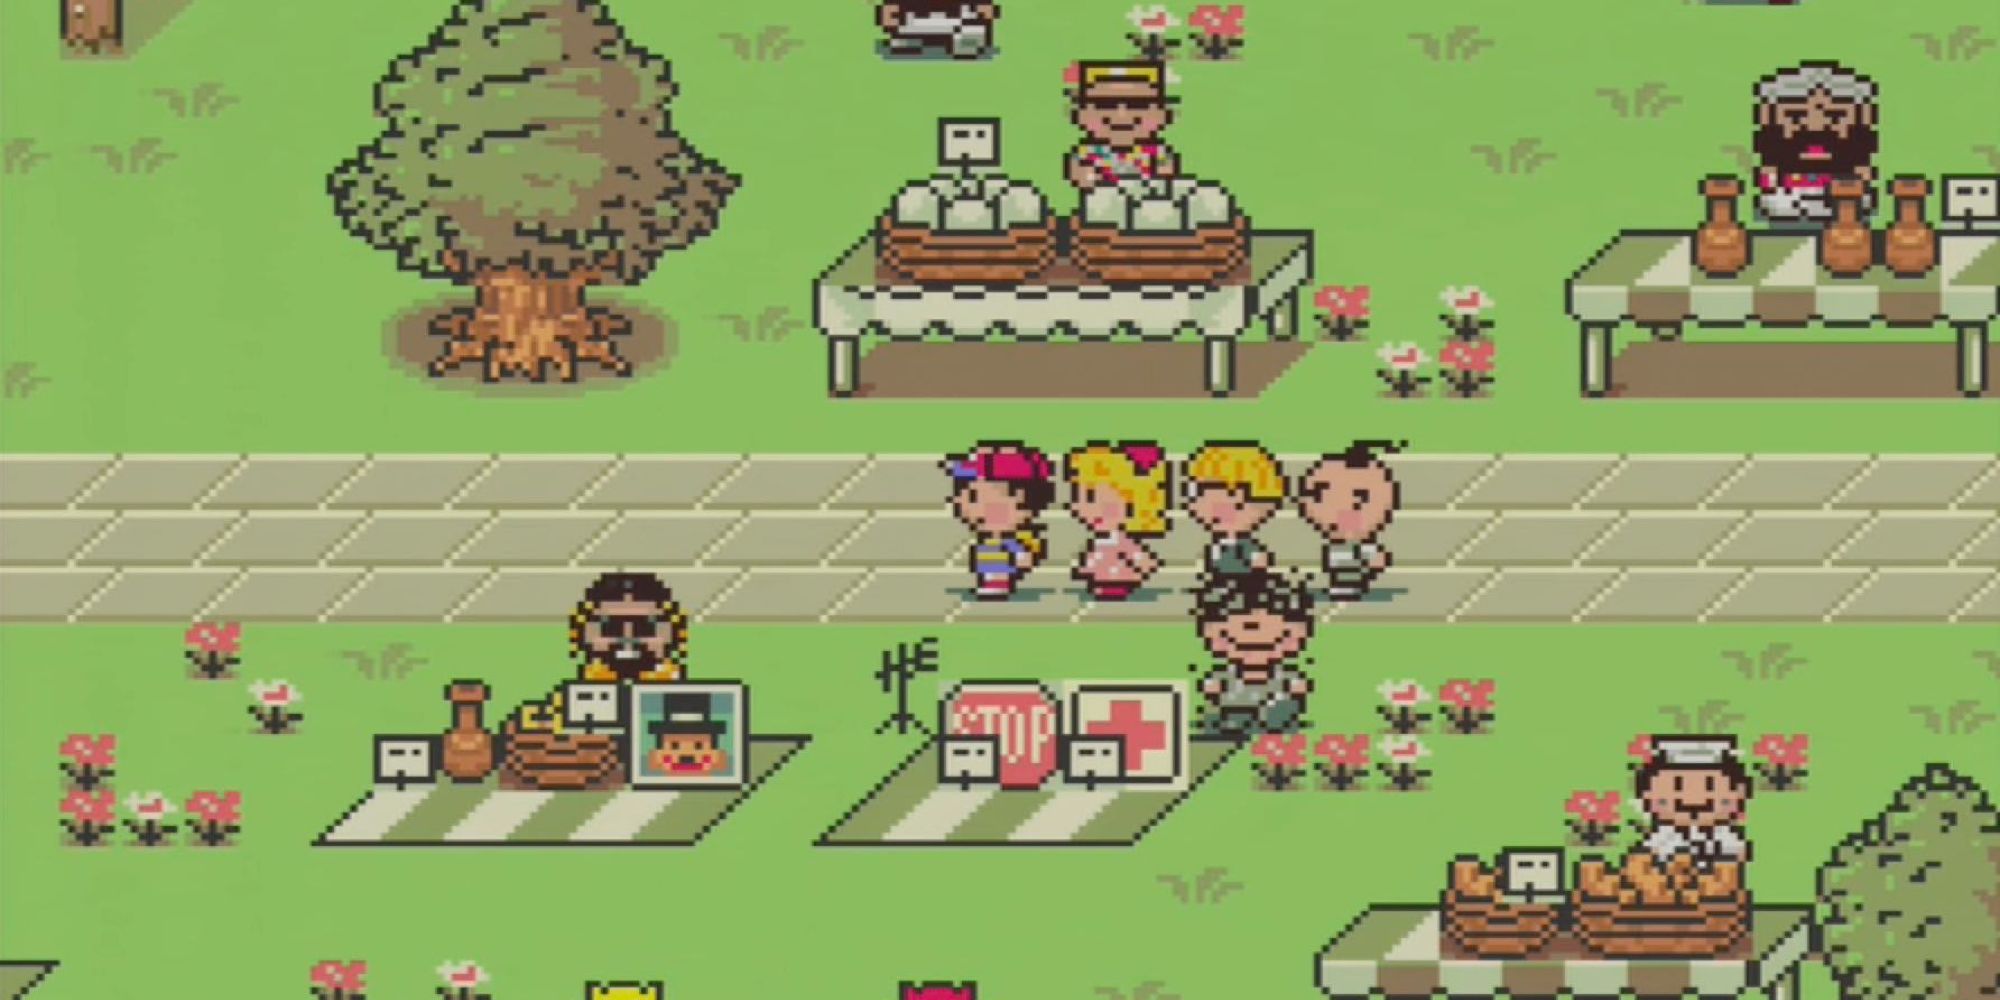 Ness and his friends walking through a town